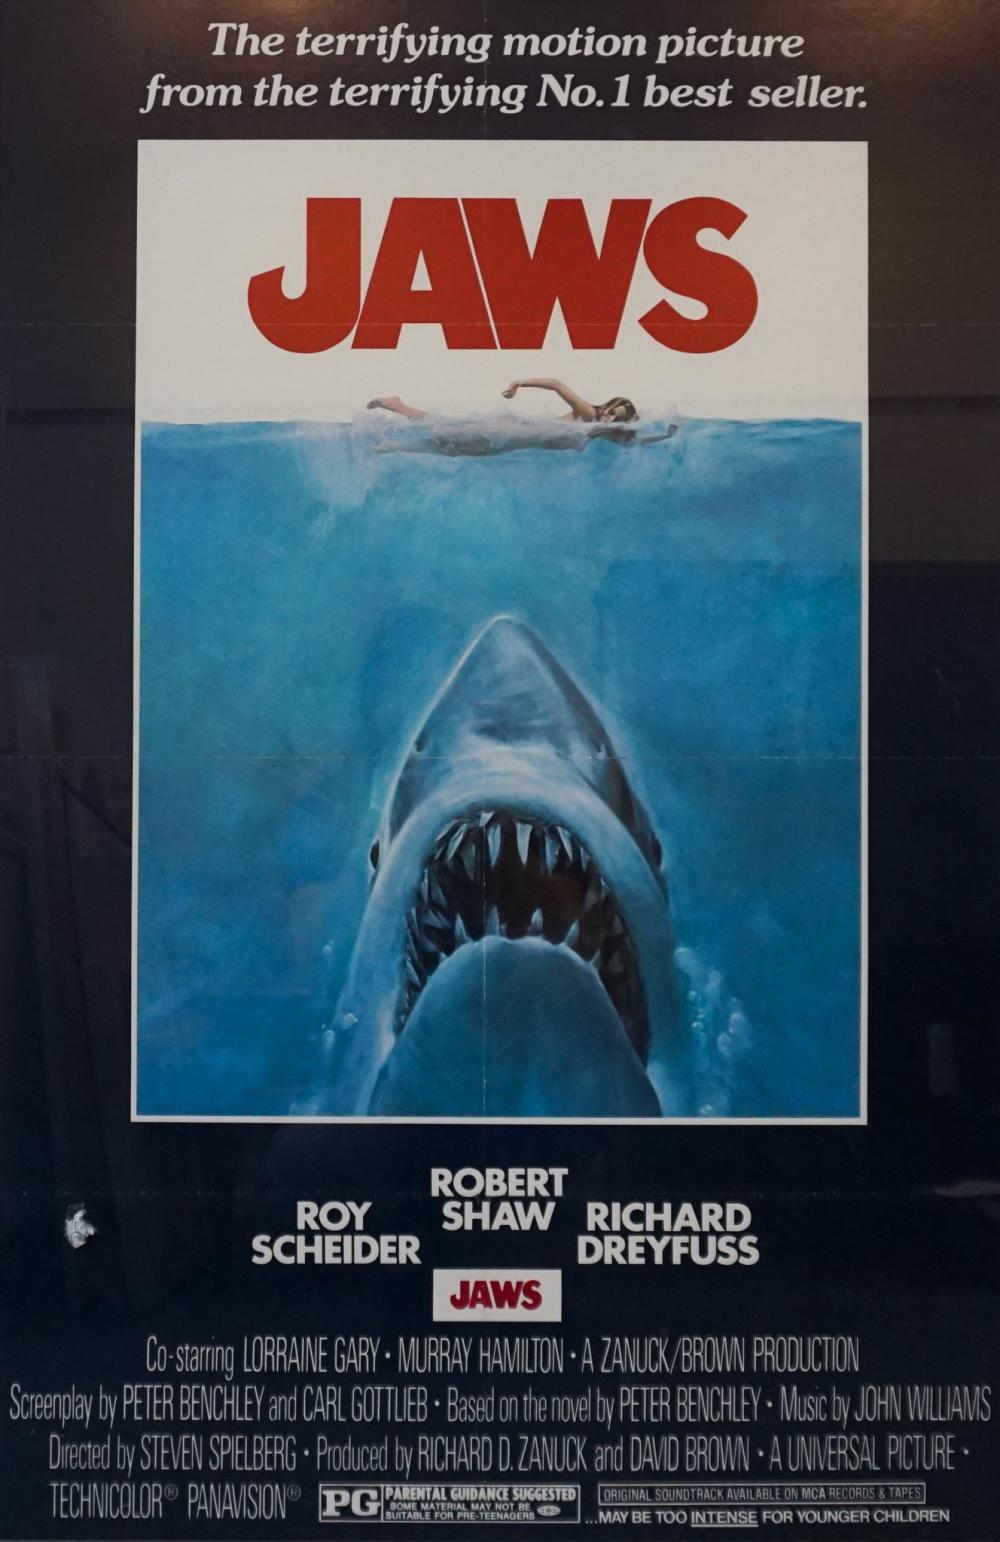 'JAWS' REPRODUCTION POSTER, FRAME: